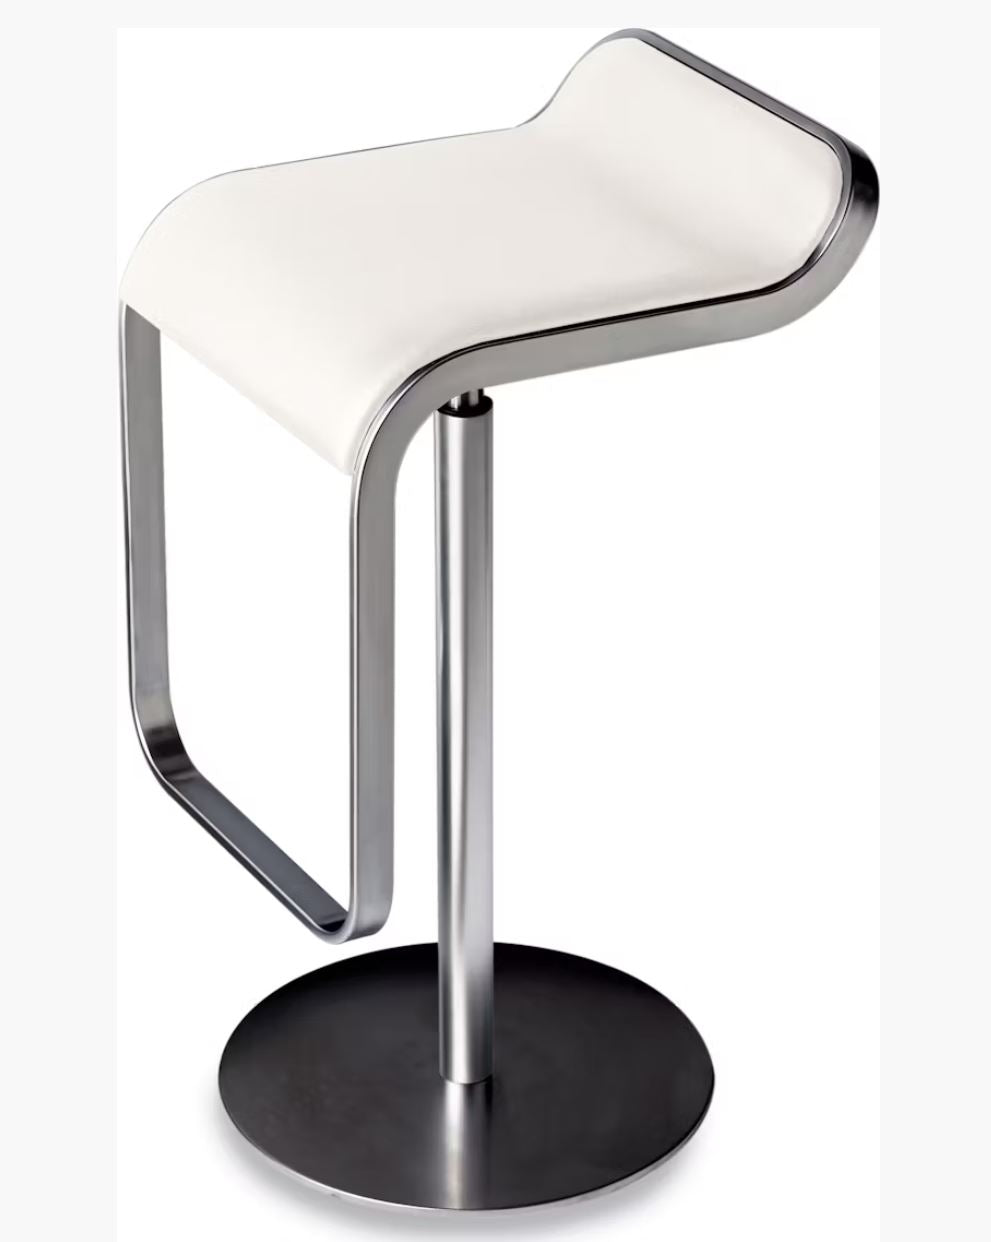 One of Four DWR Lem Piston Swivel Stools in White Leather.